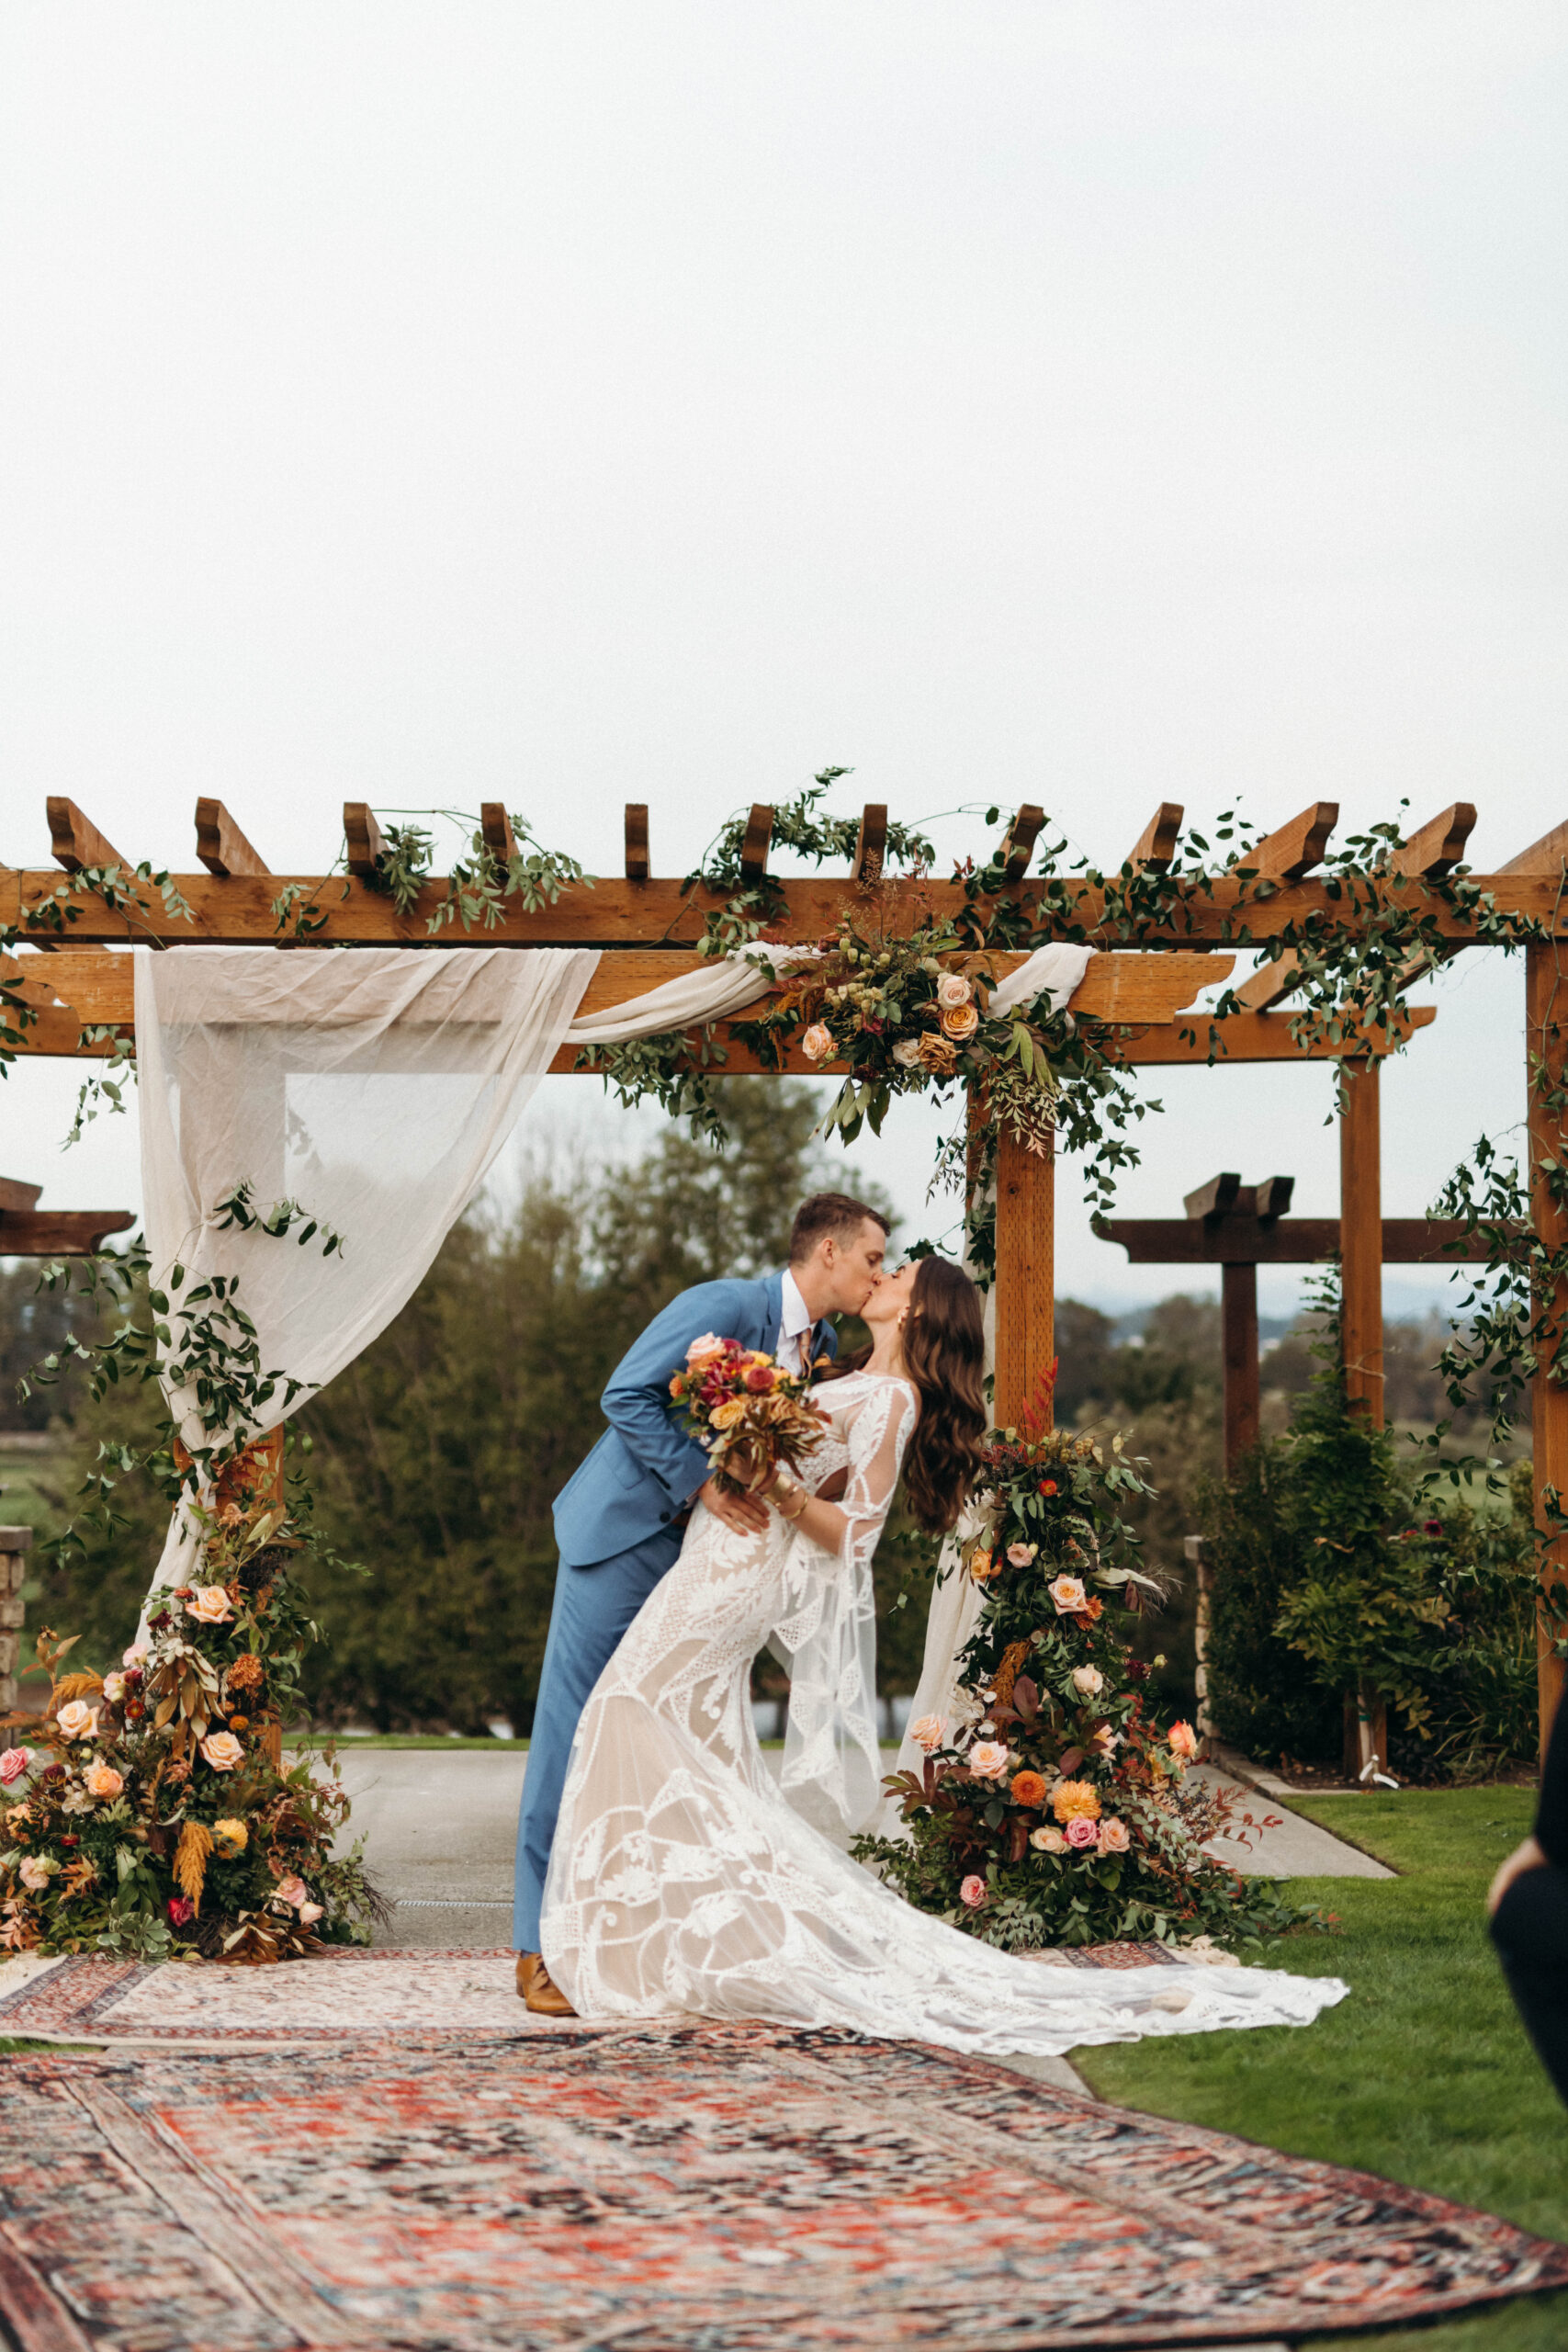 Experience the charm and elegance of a vintage-inspired wedding